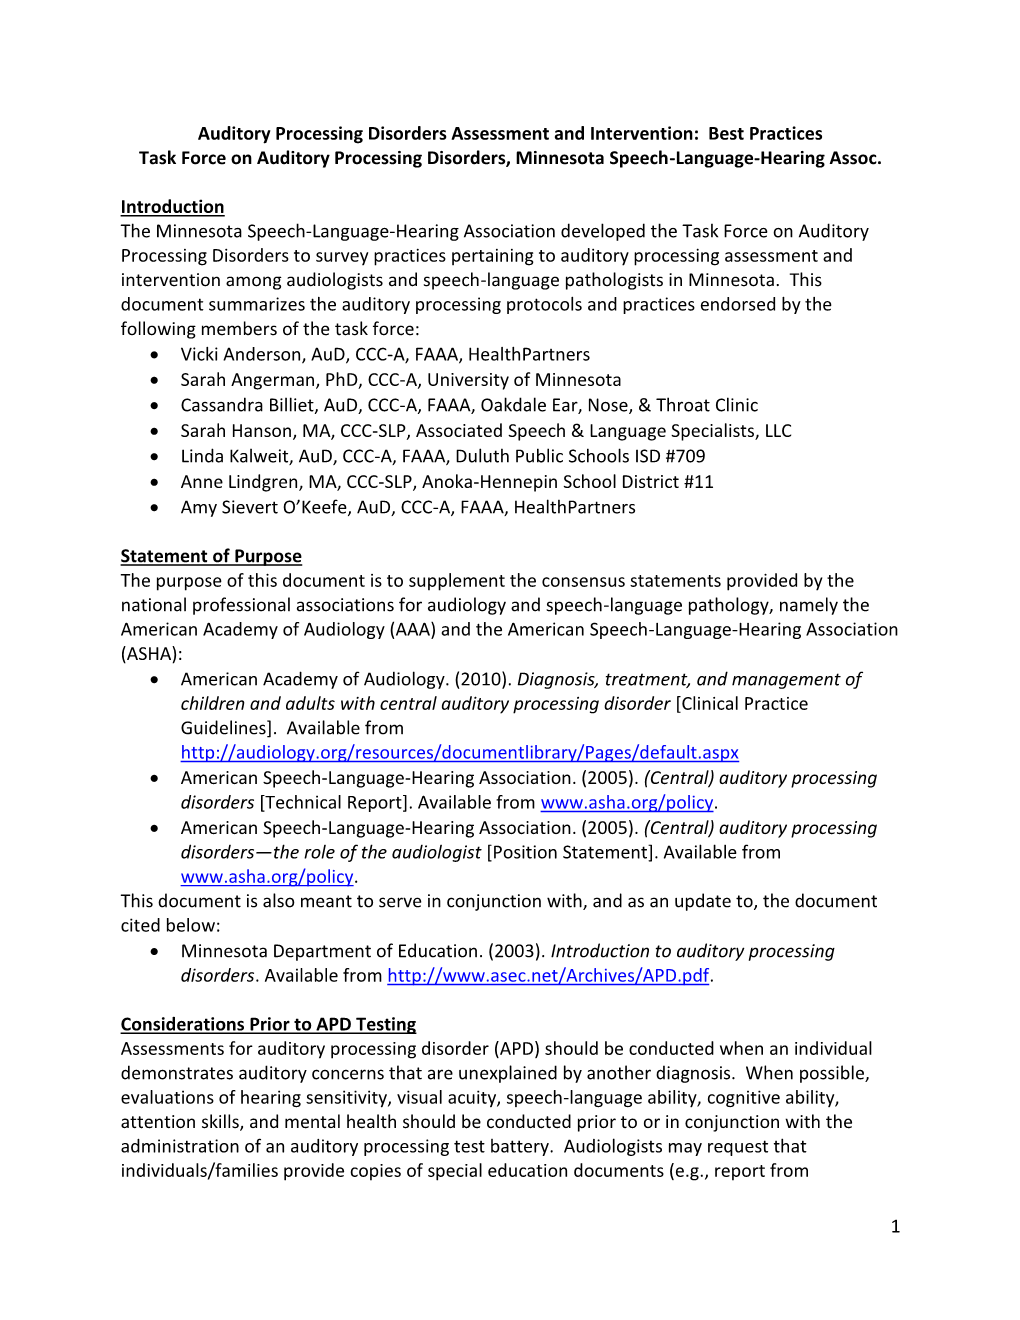 Auditory Processing Disorders Assessment and Intervention: Best Practices Task Force on Auditory Processing Disorders, Minnesota Speech-Language-Hearing Assoc